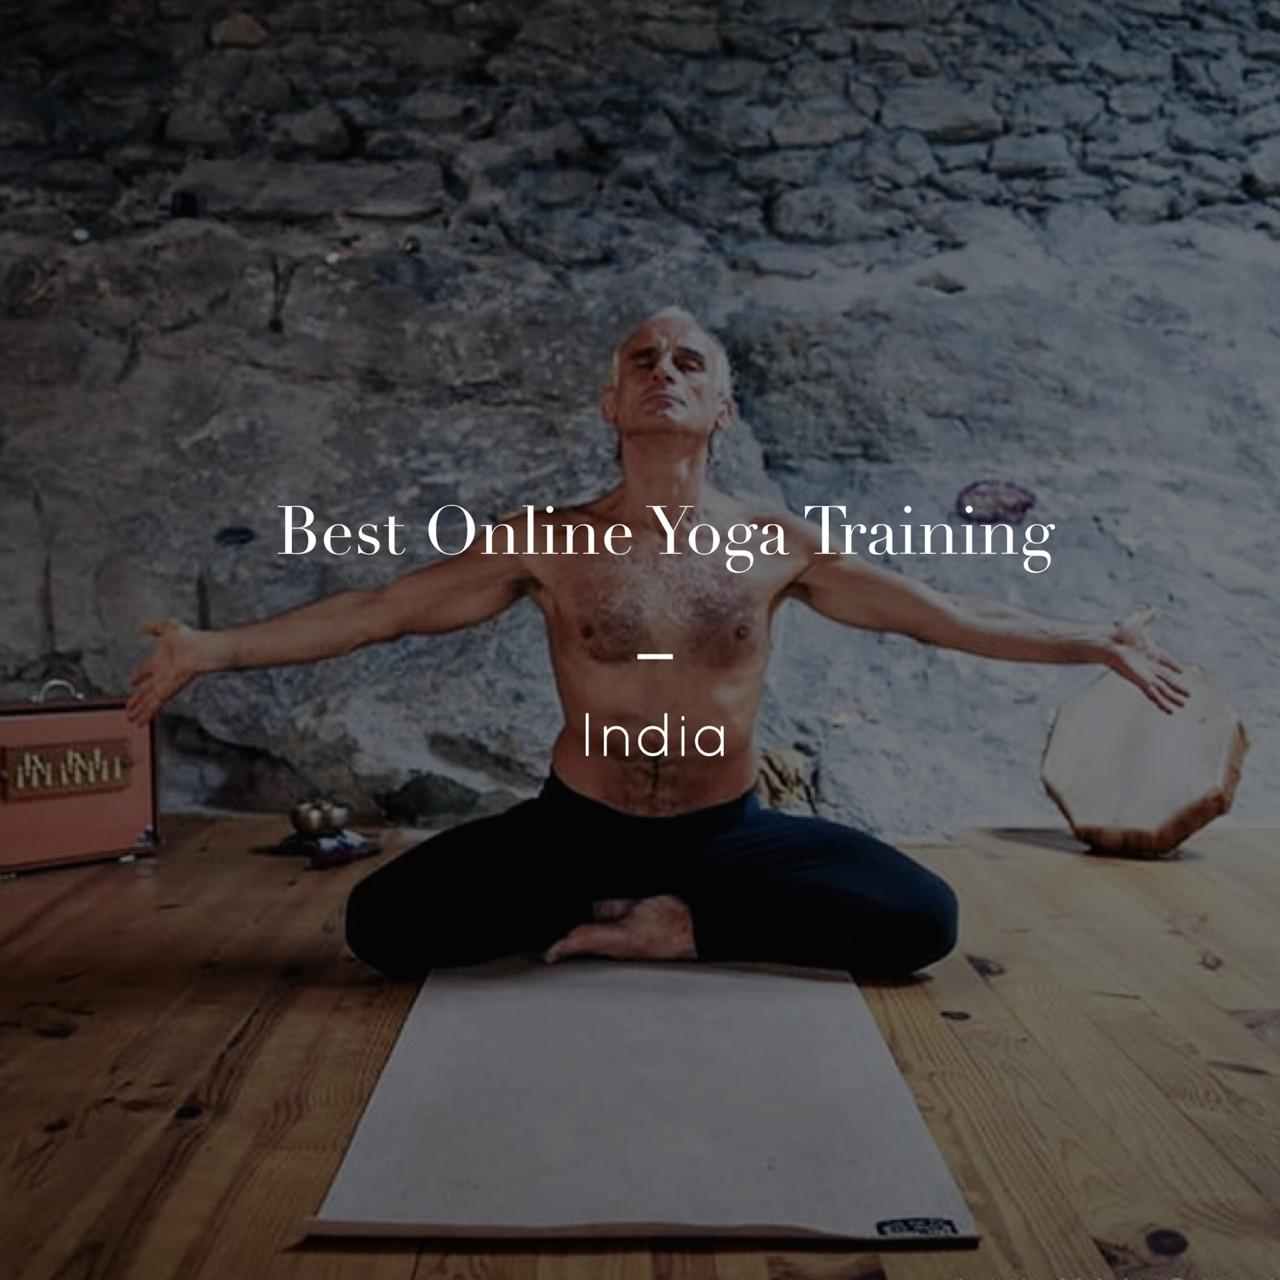 The best online yoga courses from India